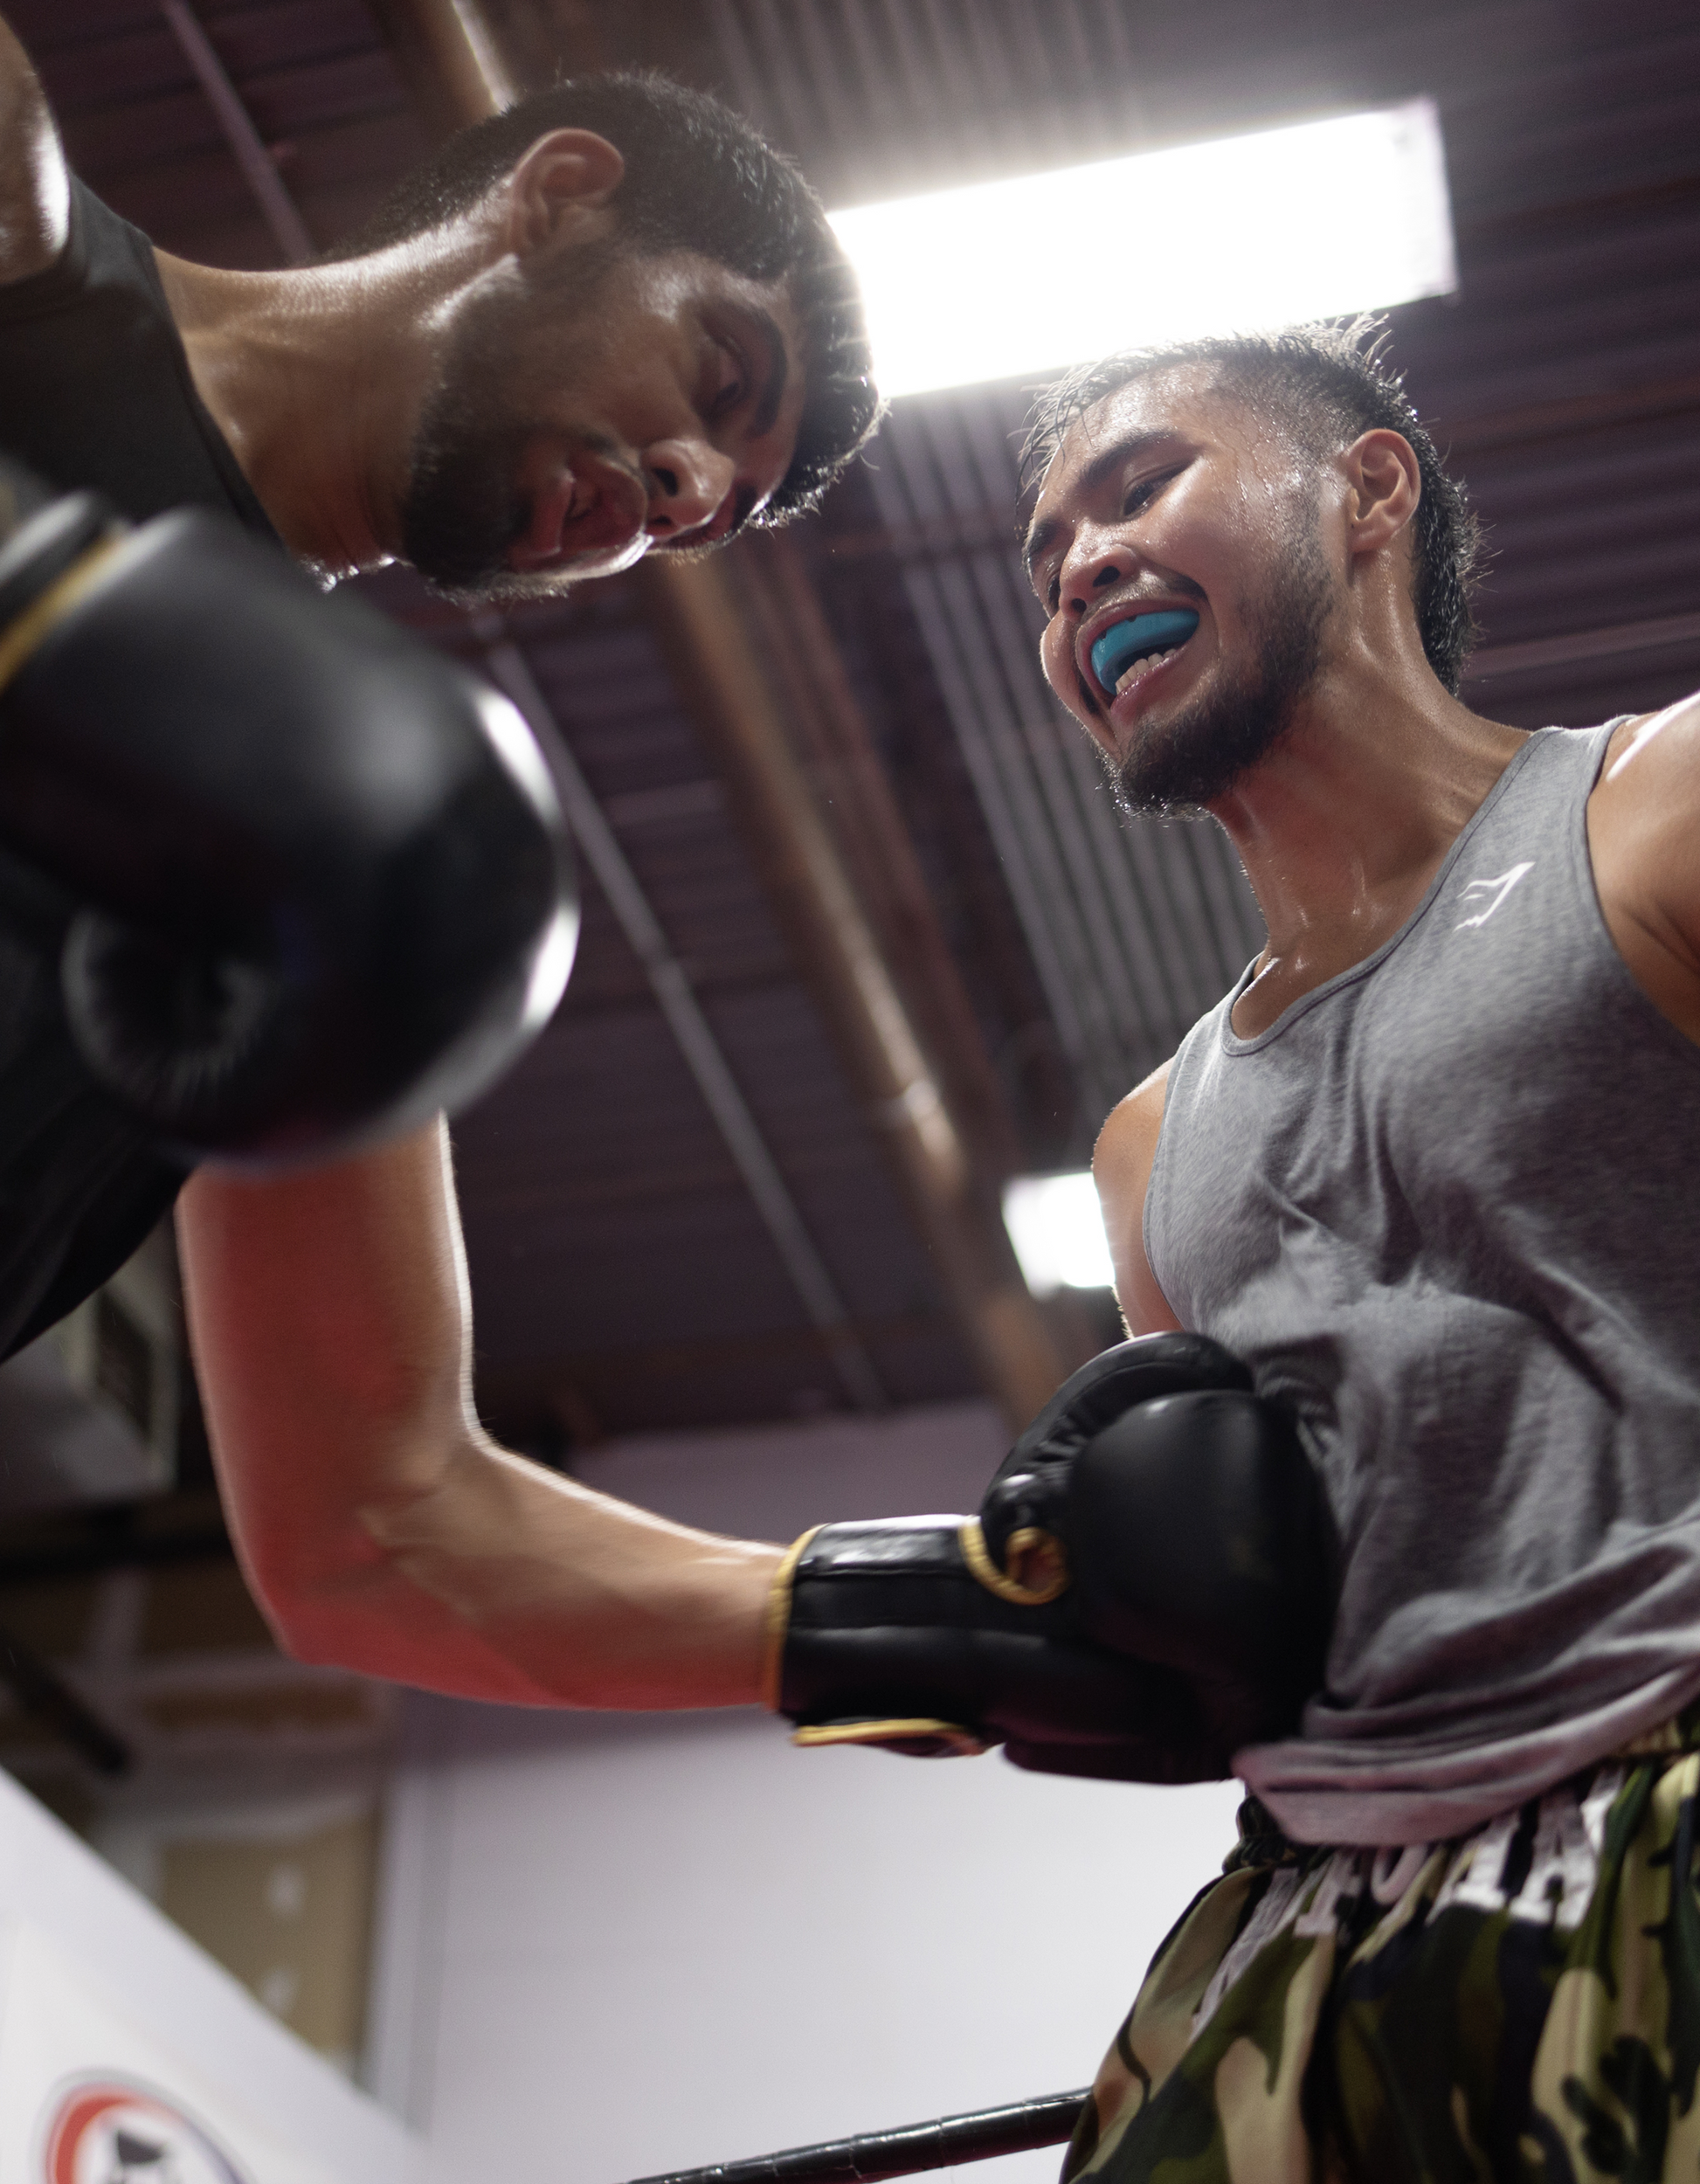 Image of two men sparring during a Muay Thai lesson at Ultimate Martial Arts & Fitness in Mississauga, Ontario, Canada